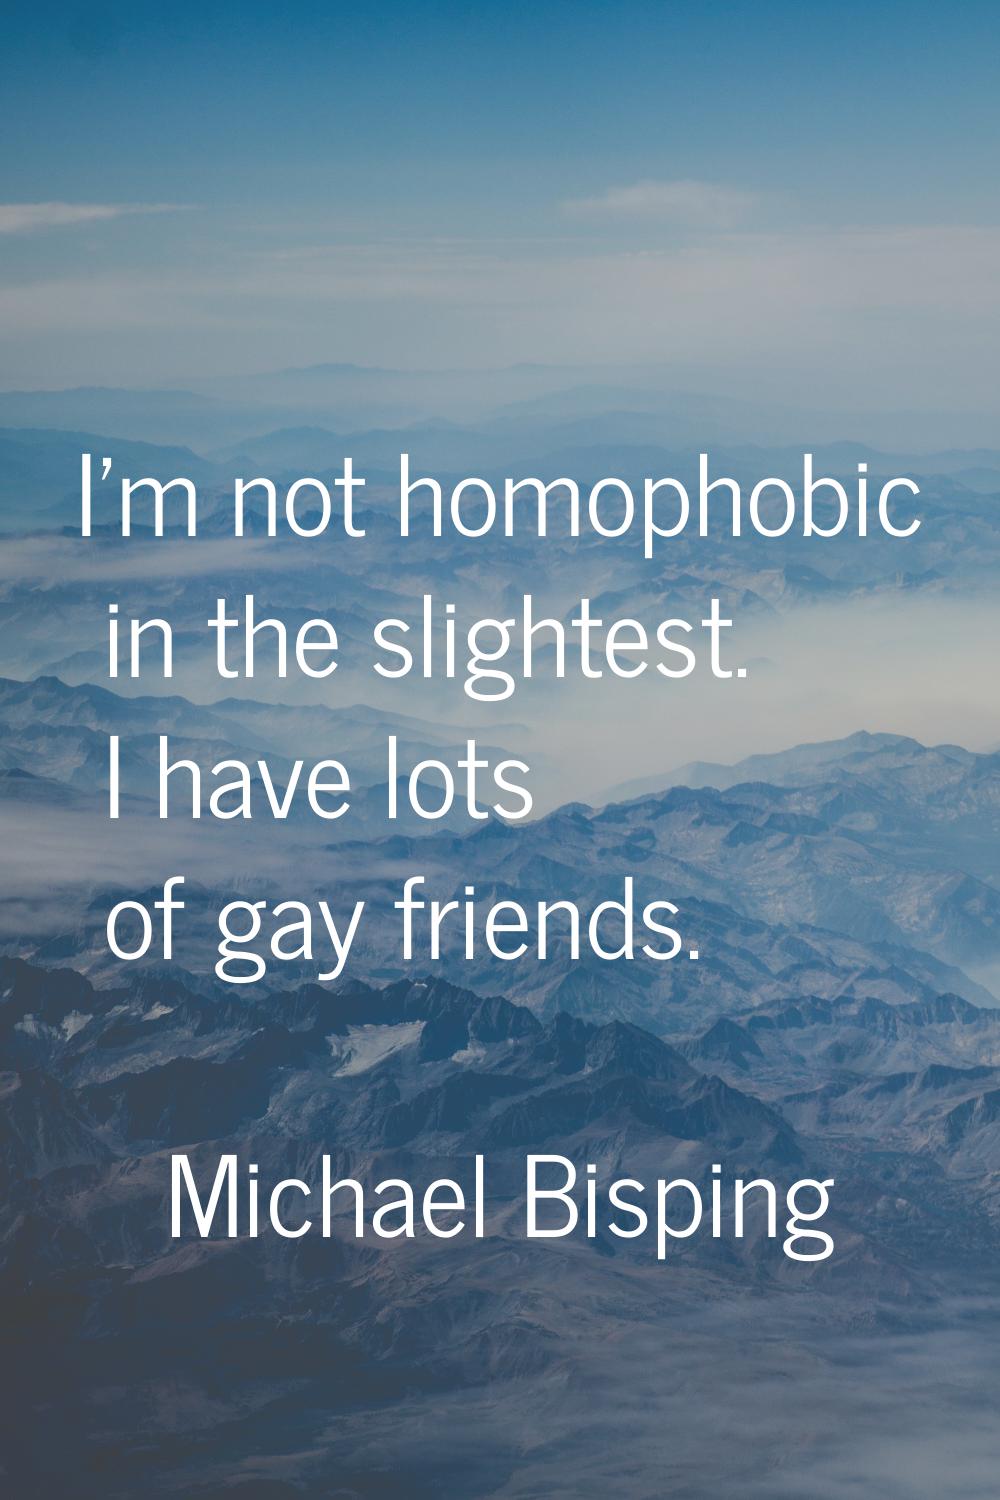 I'm not homophobic in the slightest. I have lots of gay friends.